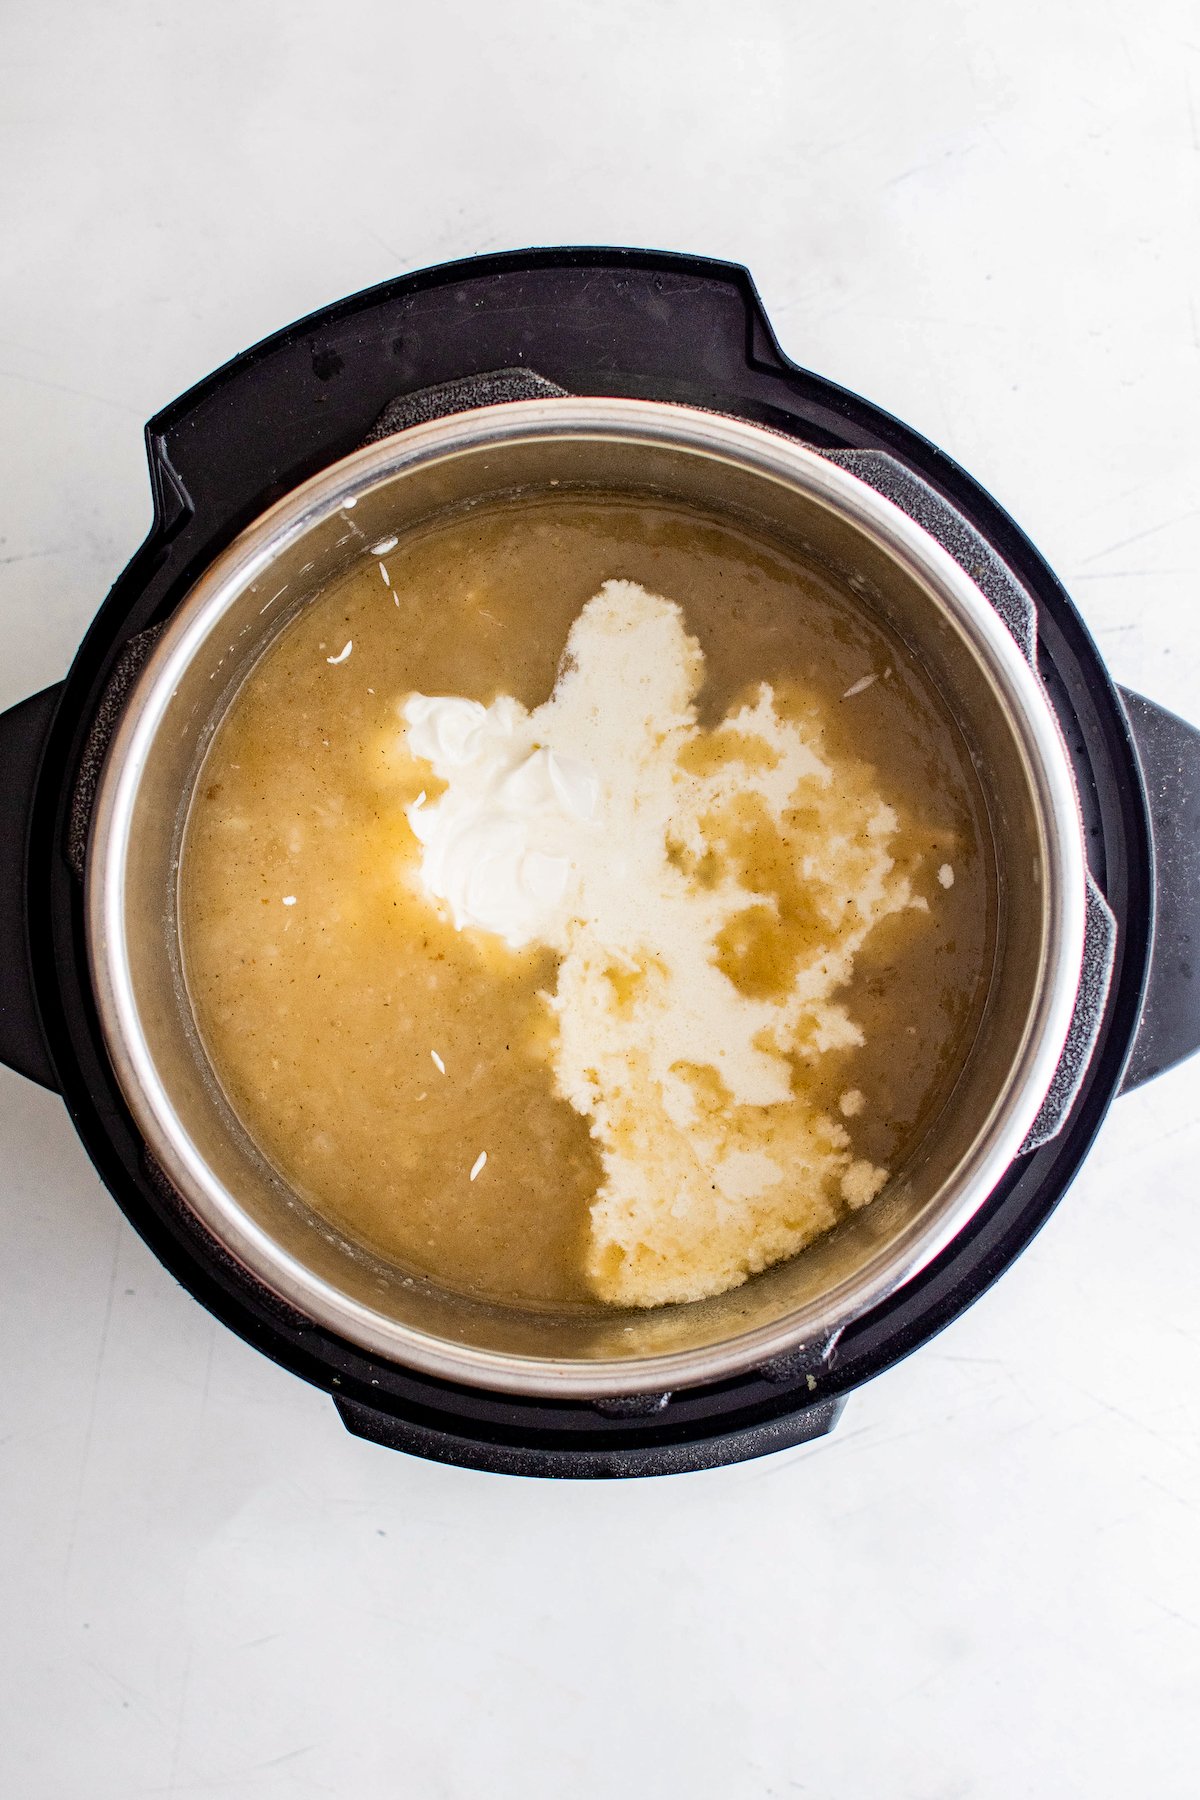 Cream poured into soup an electric pressure cooker.